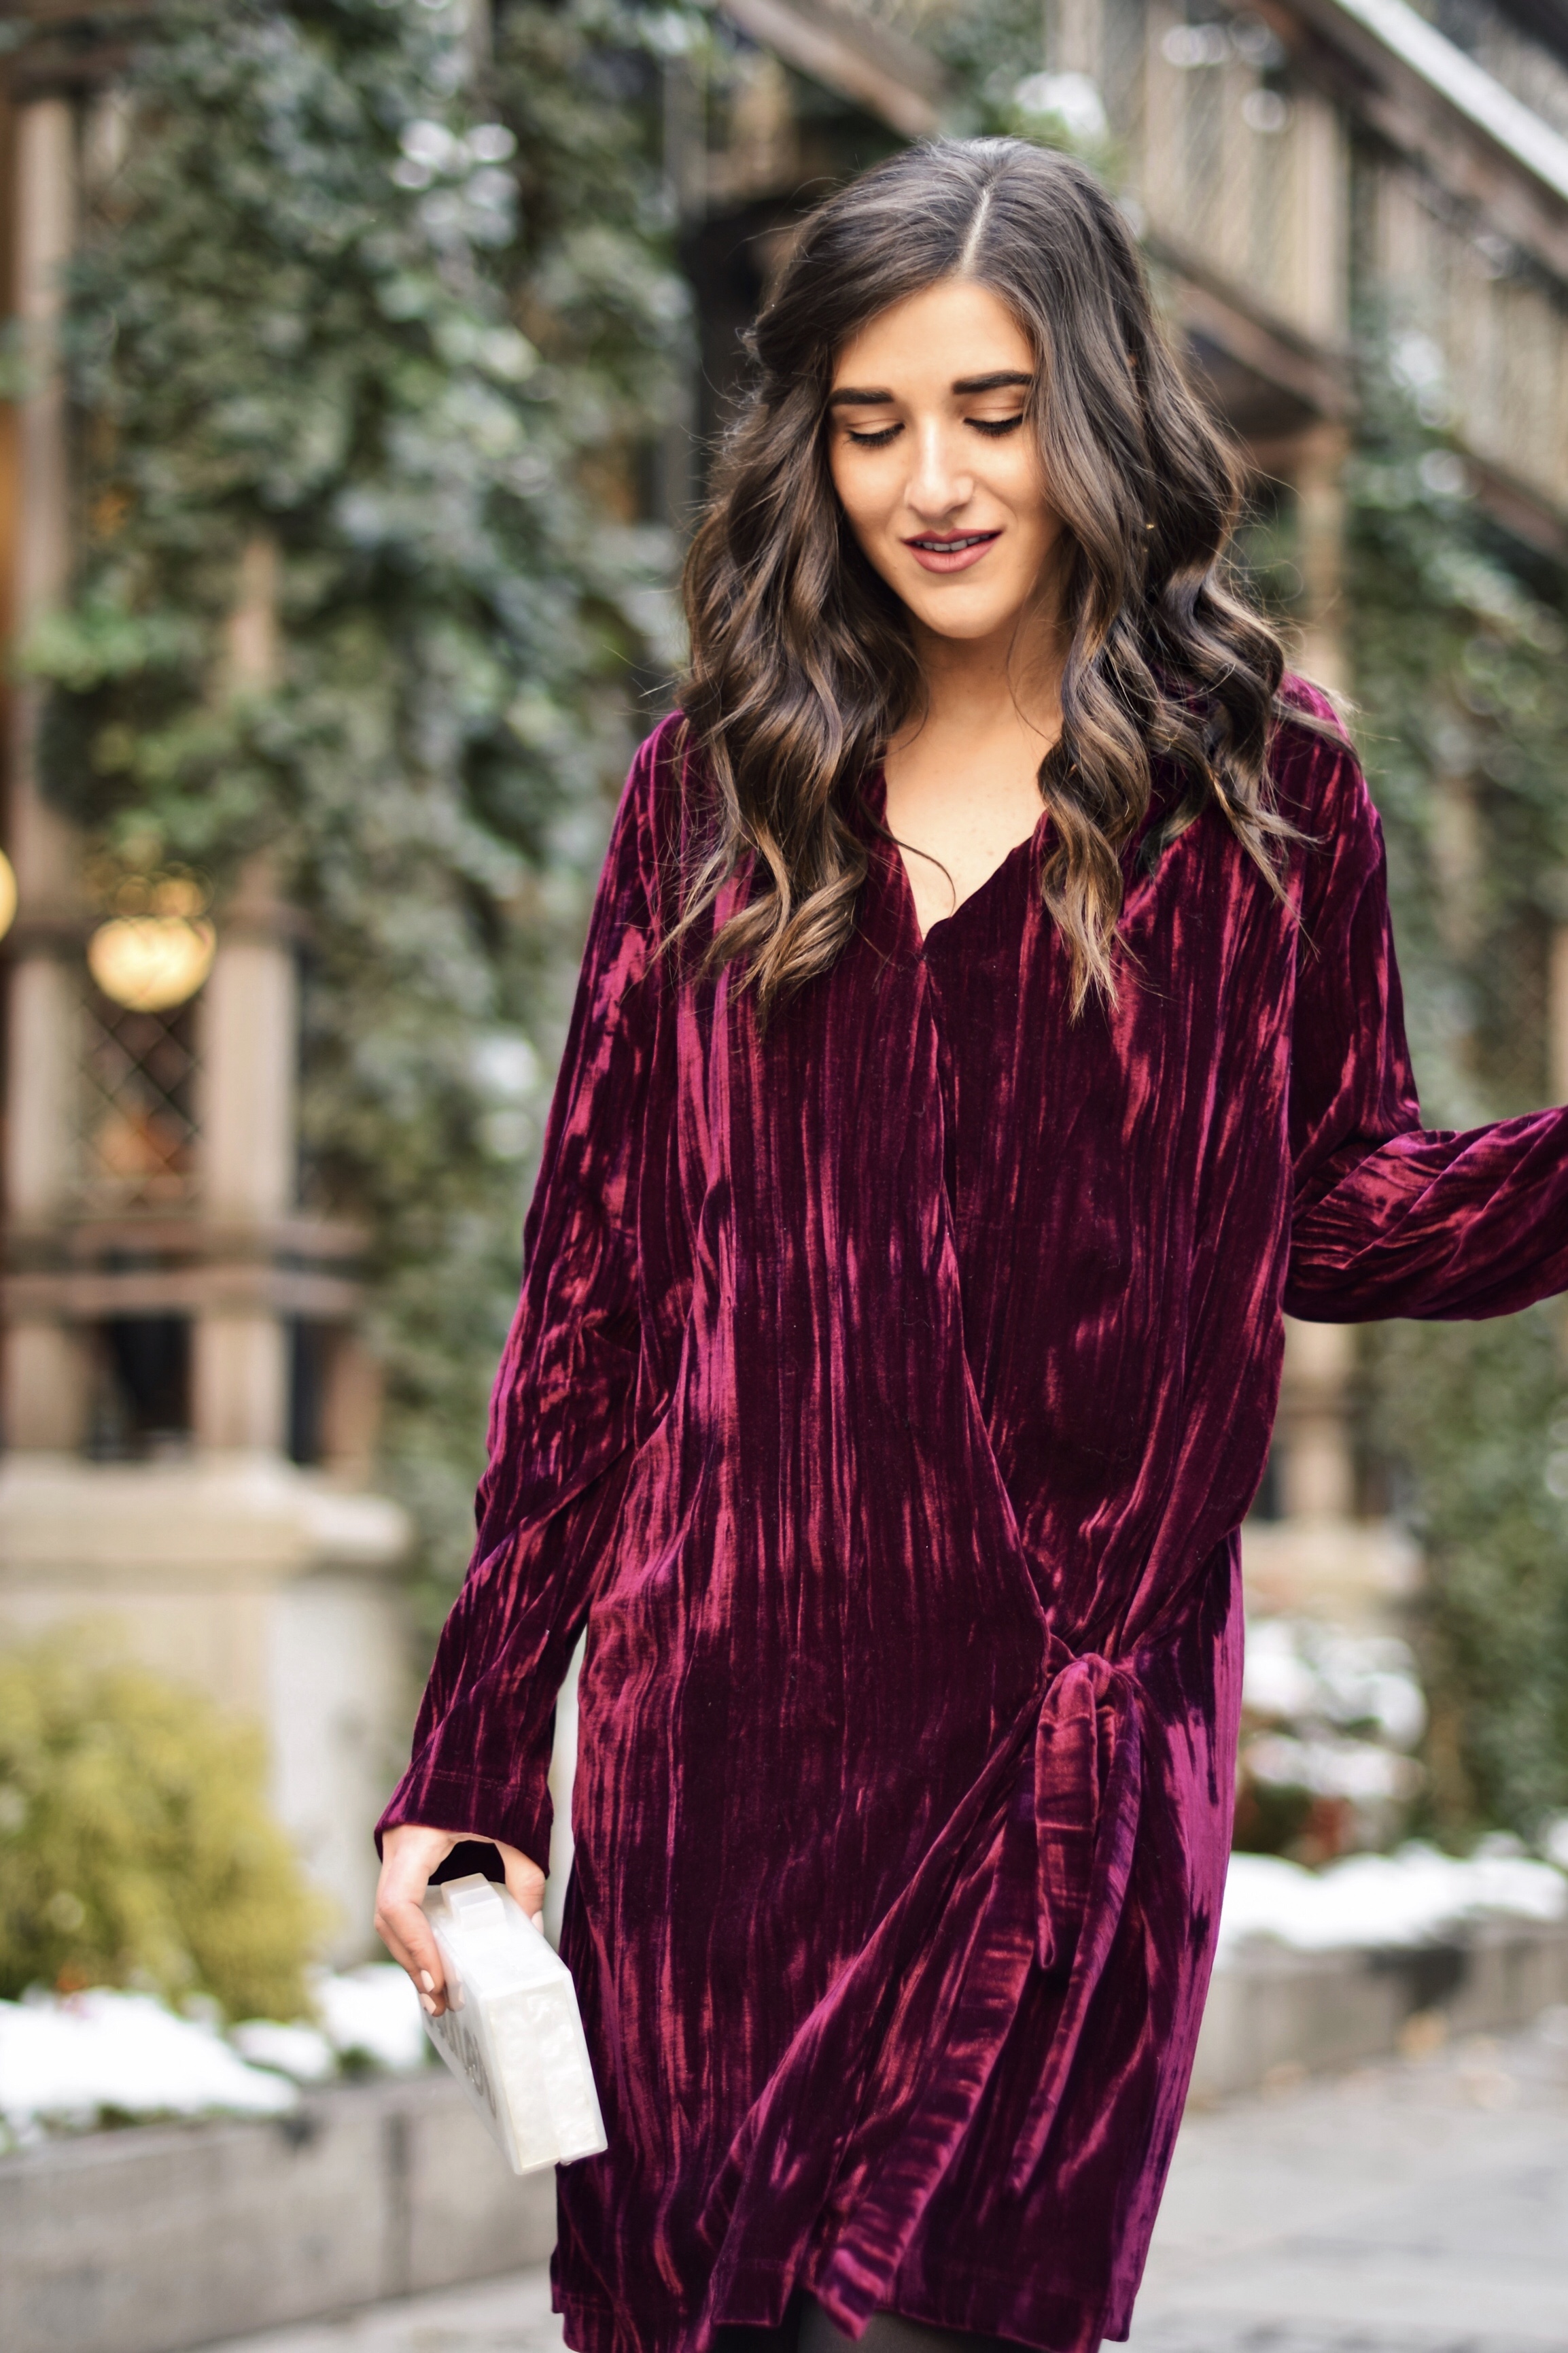 17 Tips On Building An Instagram Following Maroon Velvet Dress Black Booties Esther Santer Fashion Blog NYC Street Style Blogger Outfit OOTD Trendy Zara Online Shopping Winter Monogram Box Bag Clutch M4D3 Shoes Hue Tights New York Wear Classic Simple.jpg